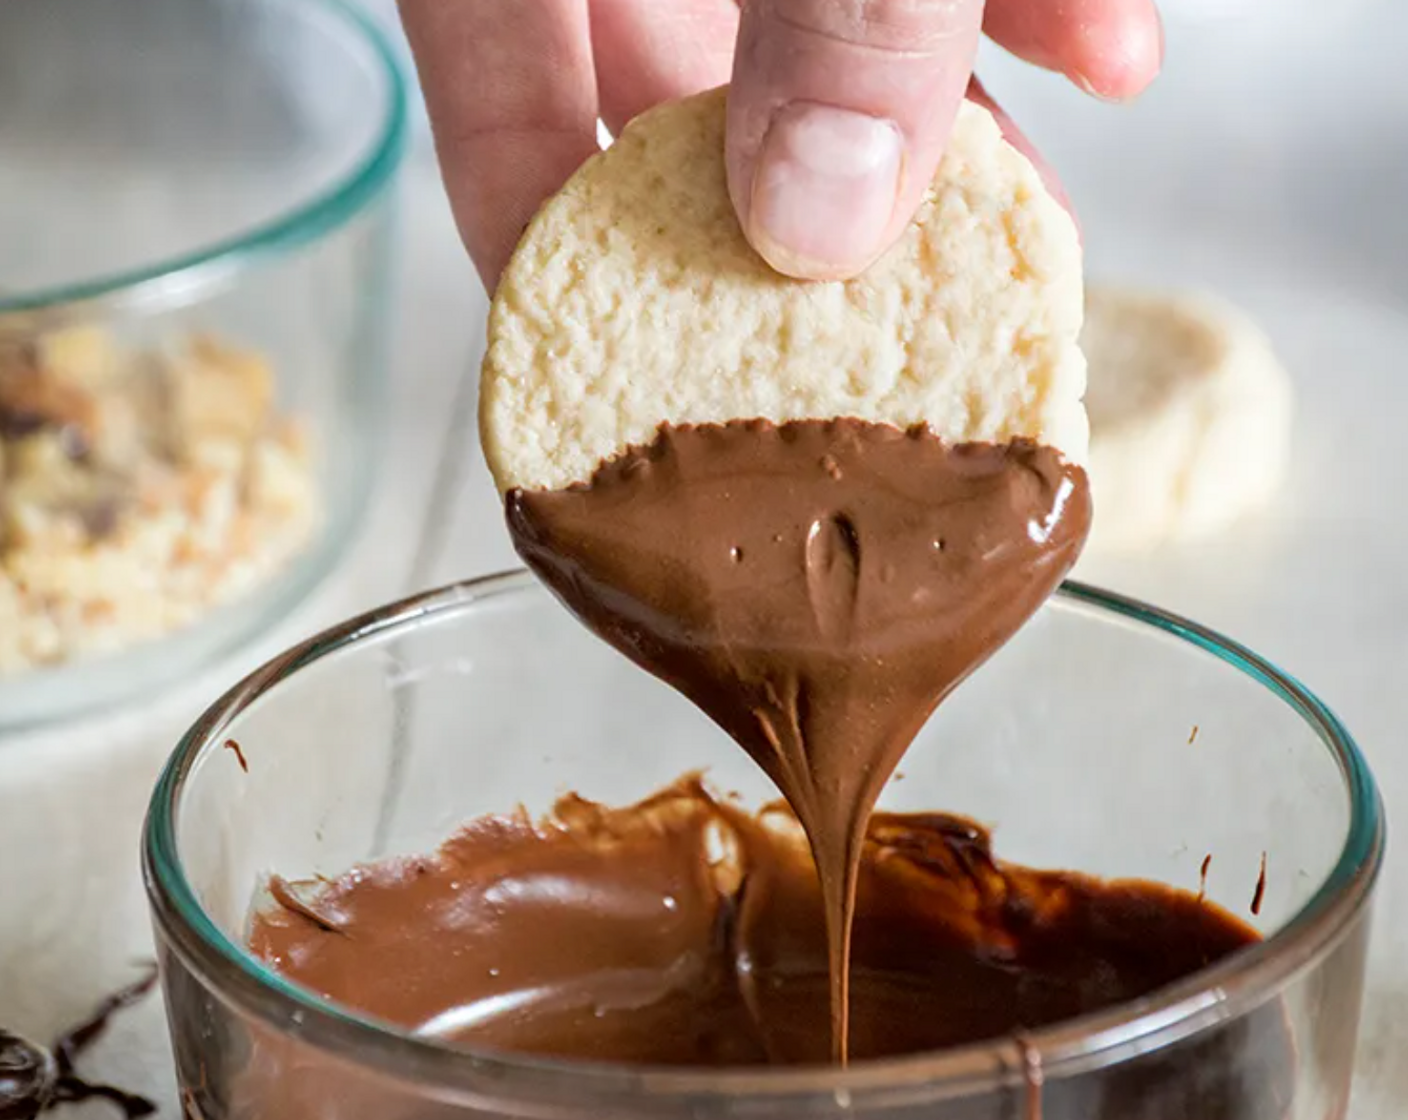 step 5 Melt Chocolate Chips (1 pckg) by microwaving in 30 second bursts, stirring in between. Dip cooled cookies into chocolate and allow to harden. Enjoy!